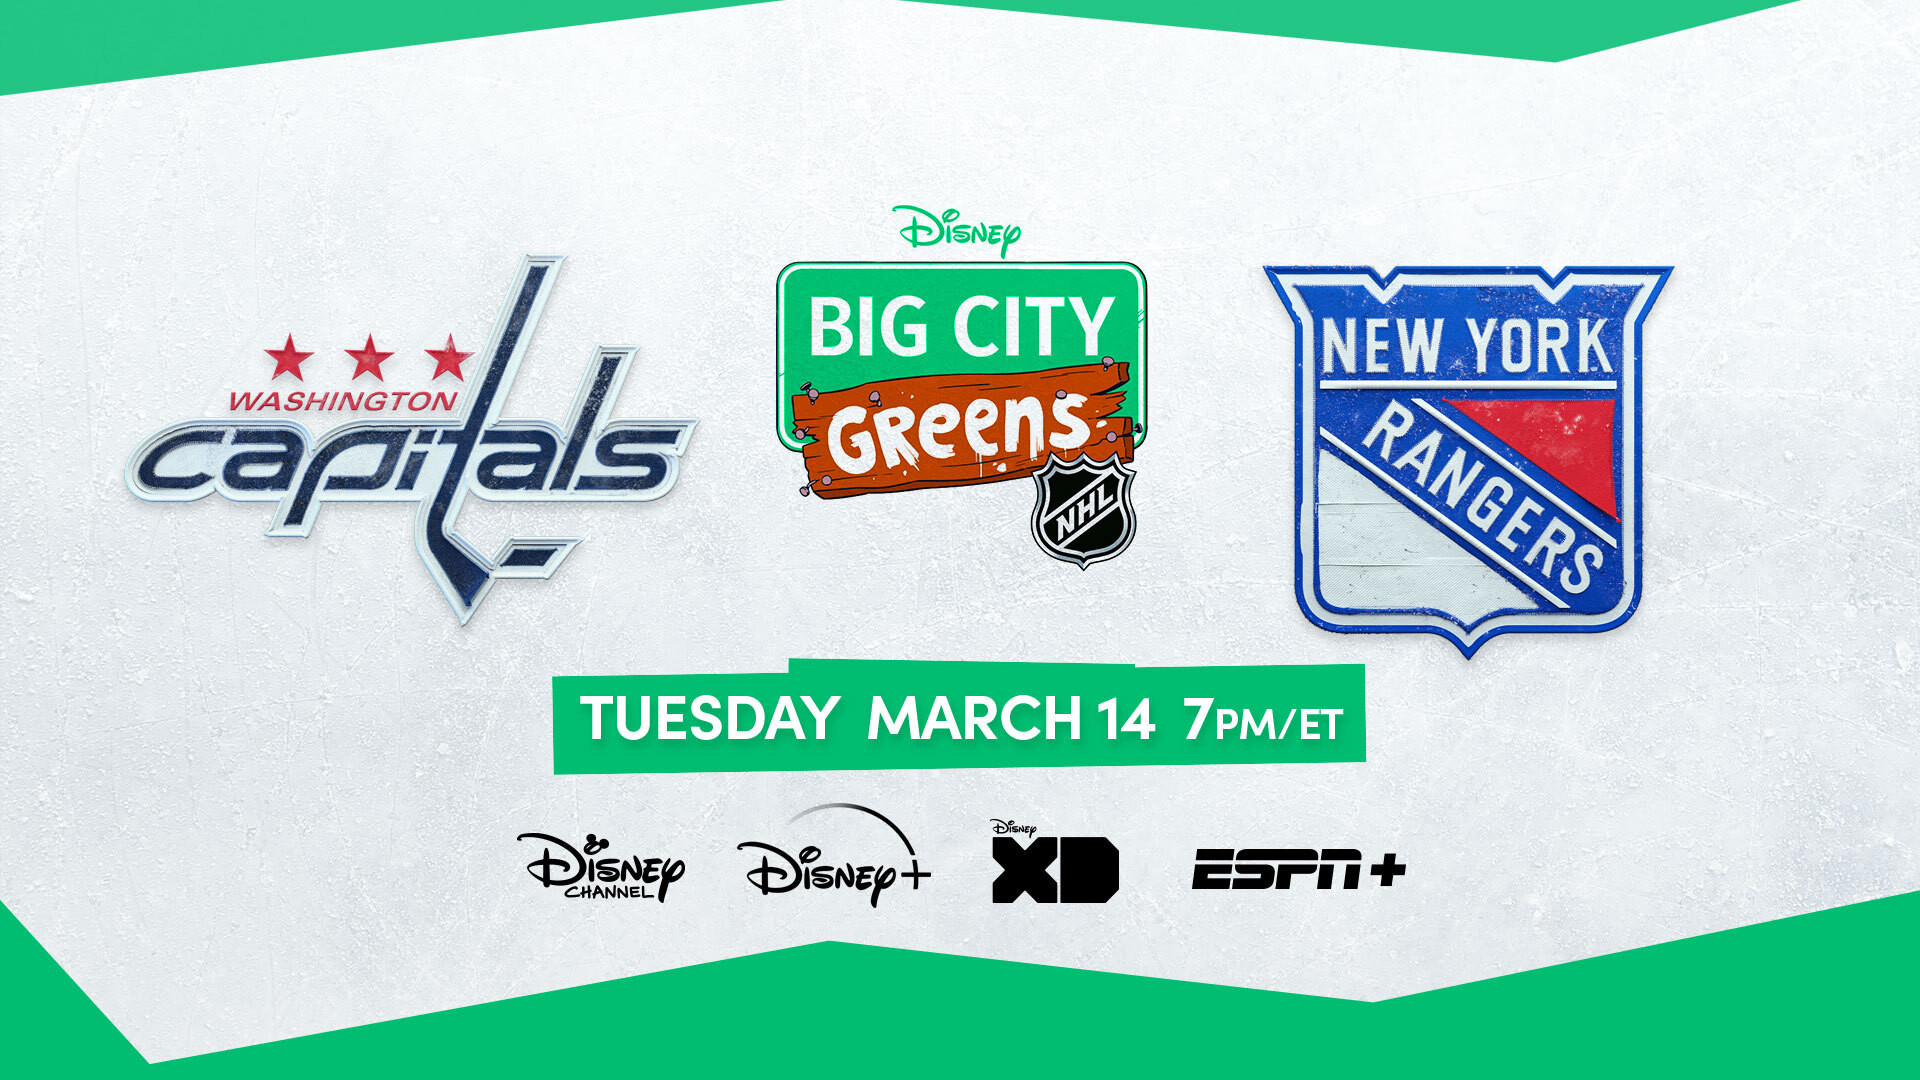 ESPN, Disney Channel and NHL to stage first live animated game telecast